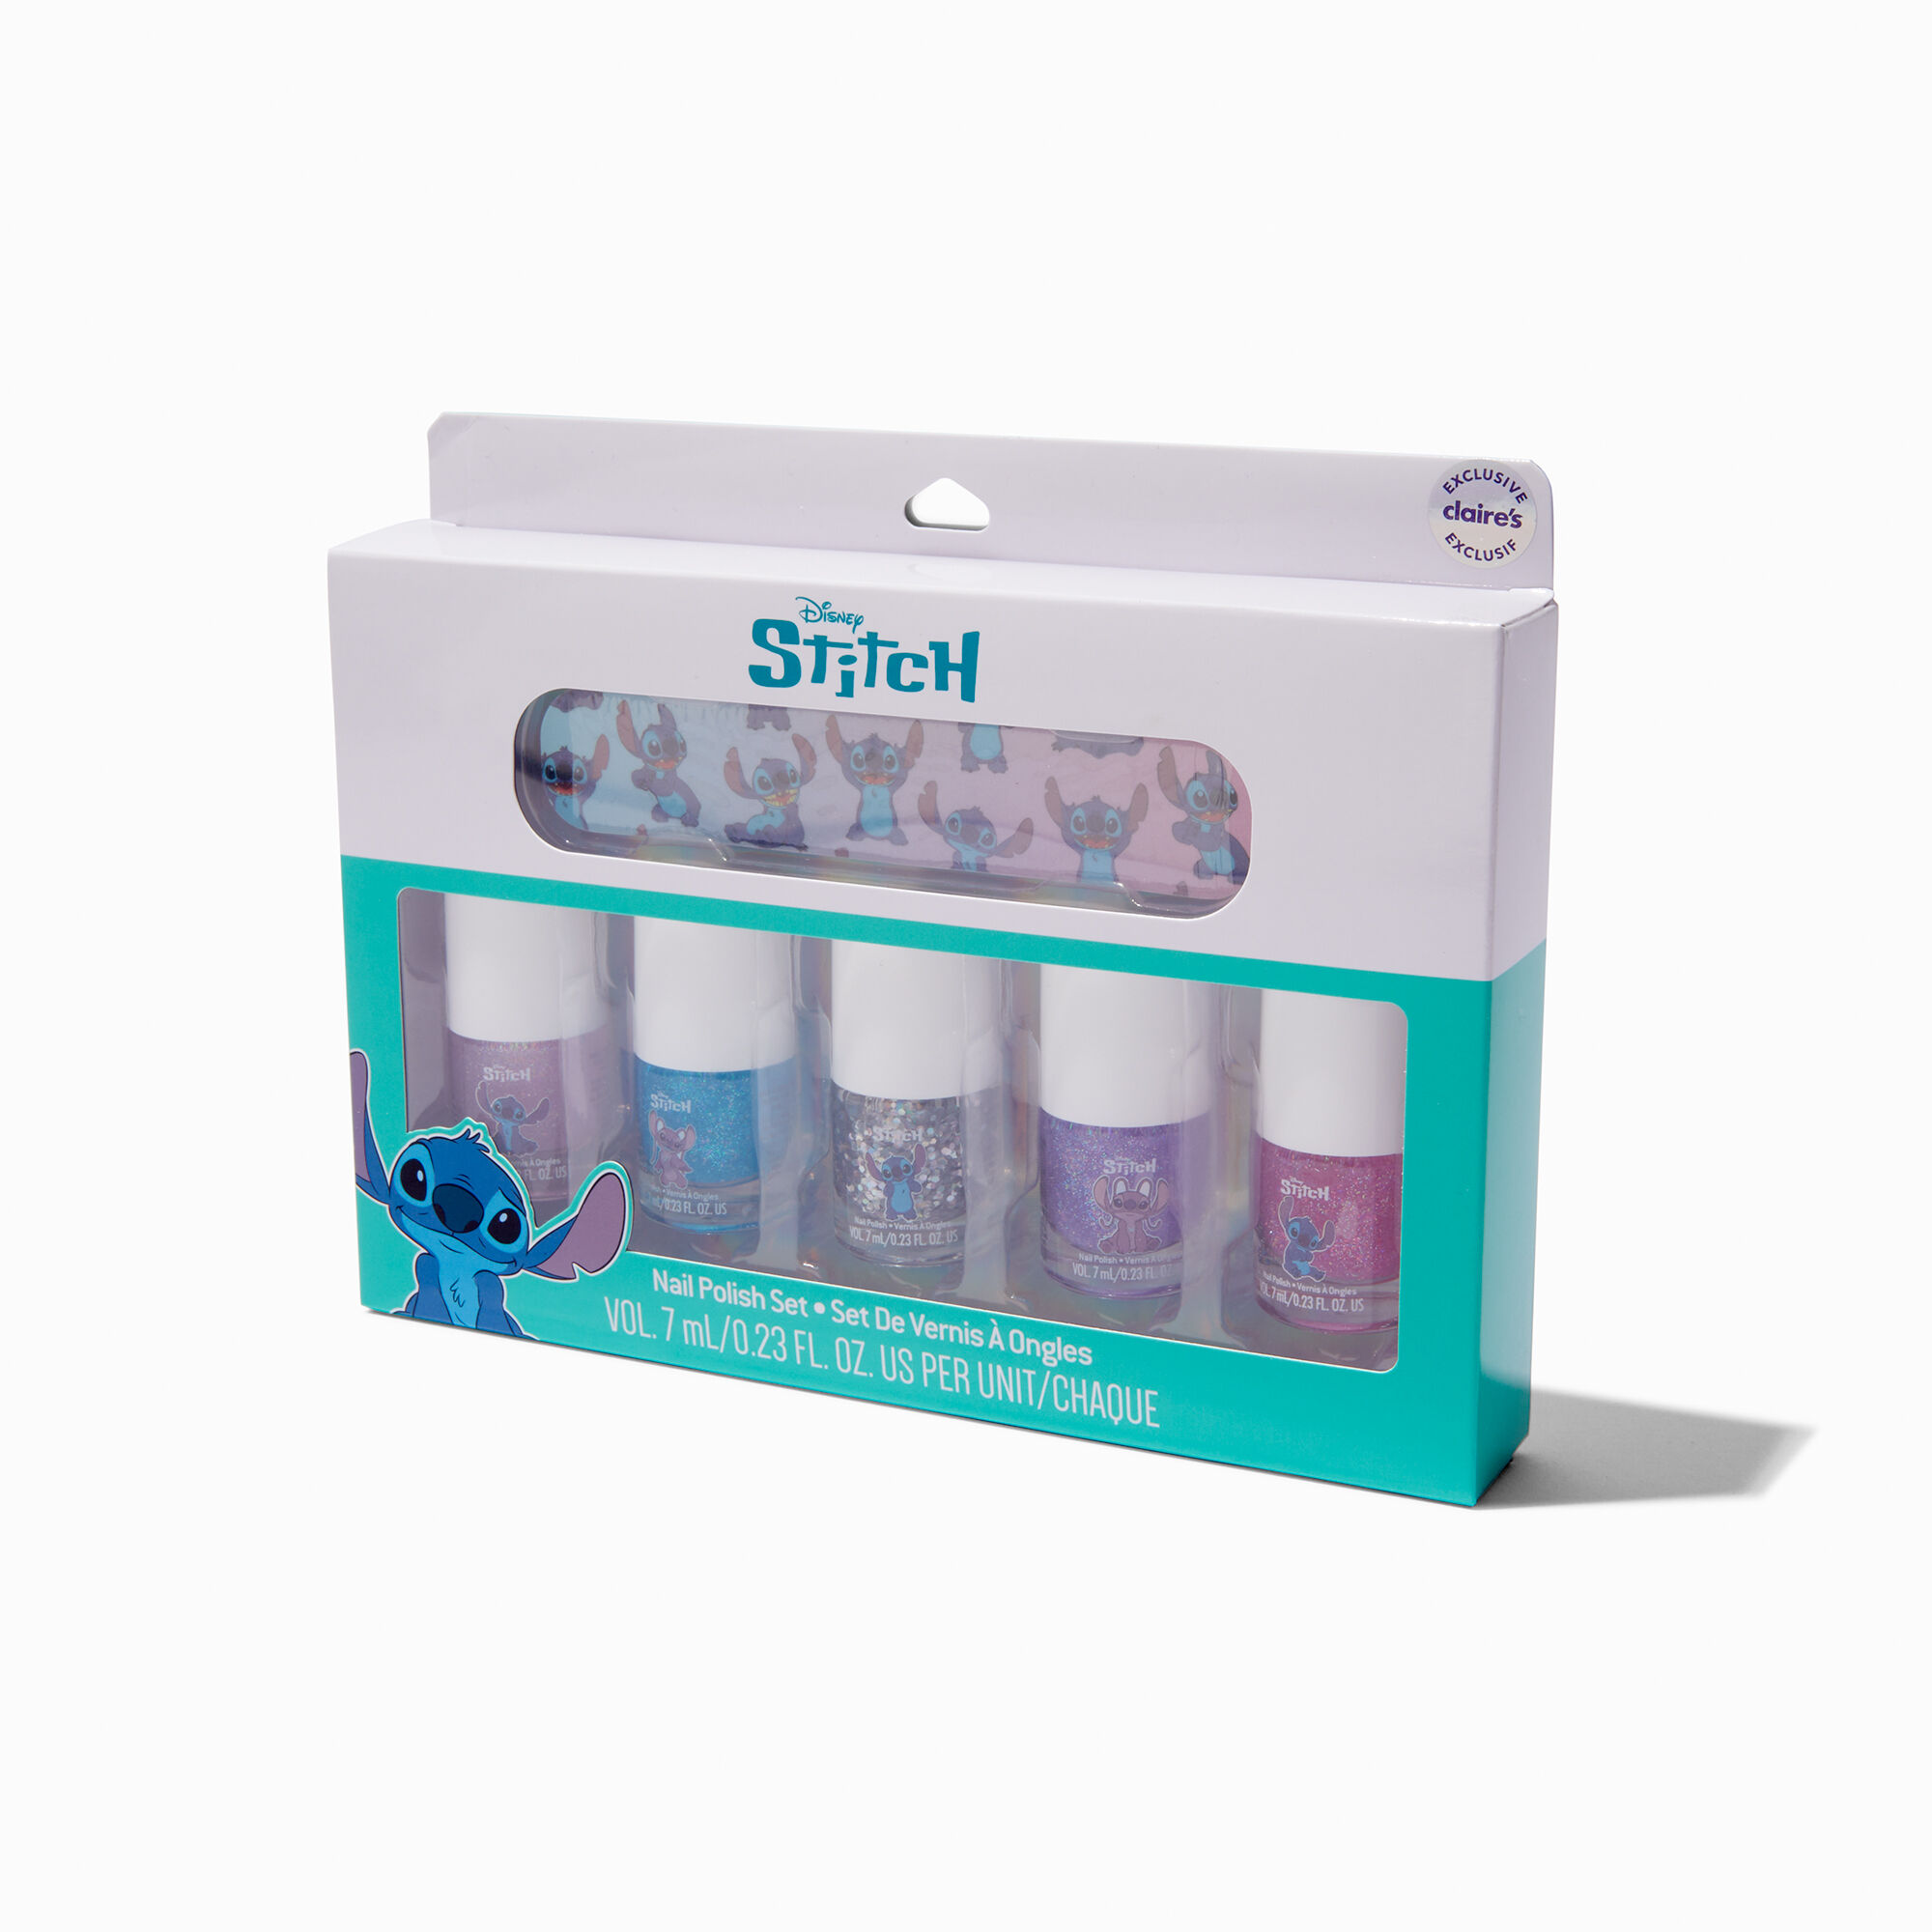 View Disney Stitch Claires Exclusive Nail Polish Set 6 Pack information